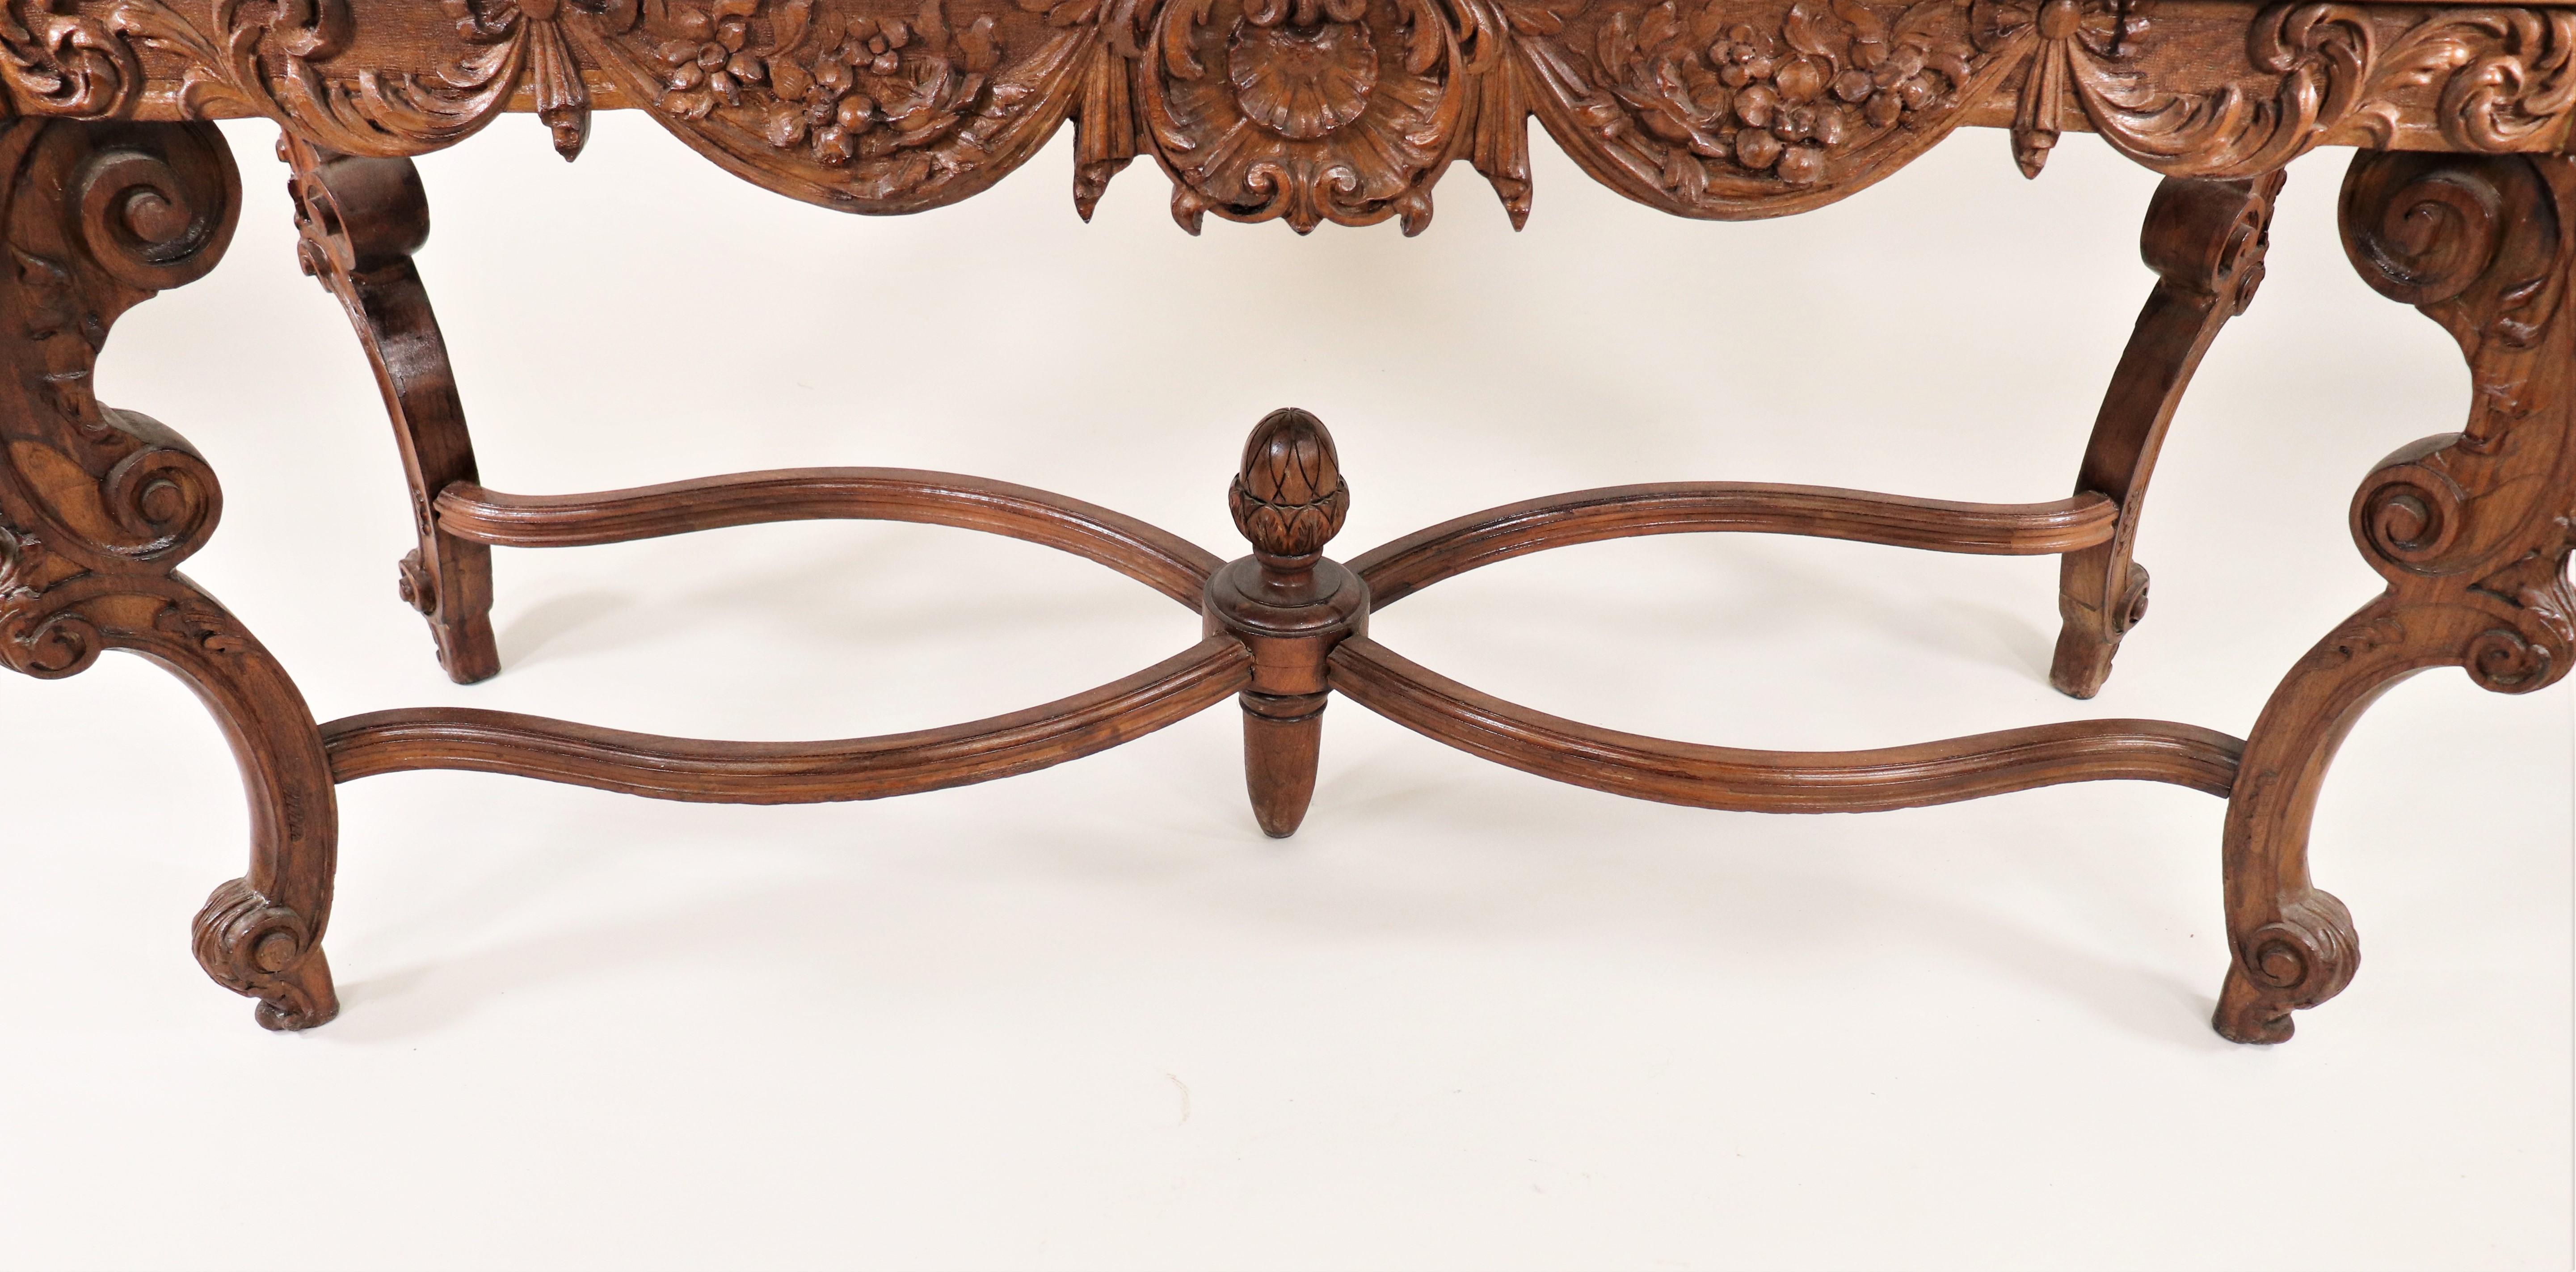 19th Century French Louis XV Style Carved Walnut and Marble Console Table For Sale 6